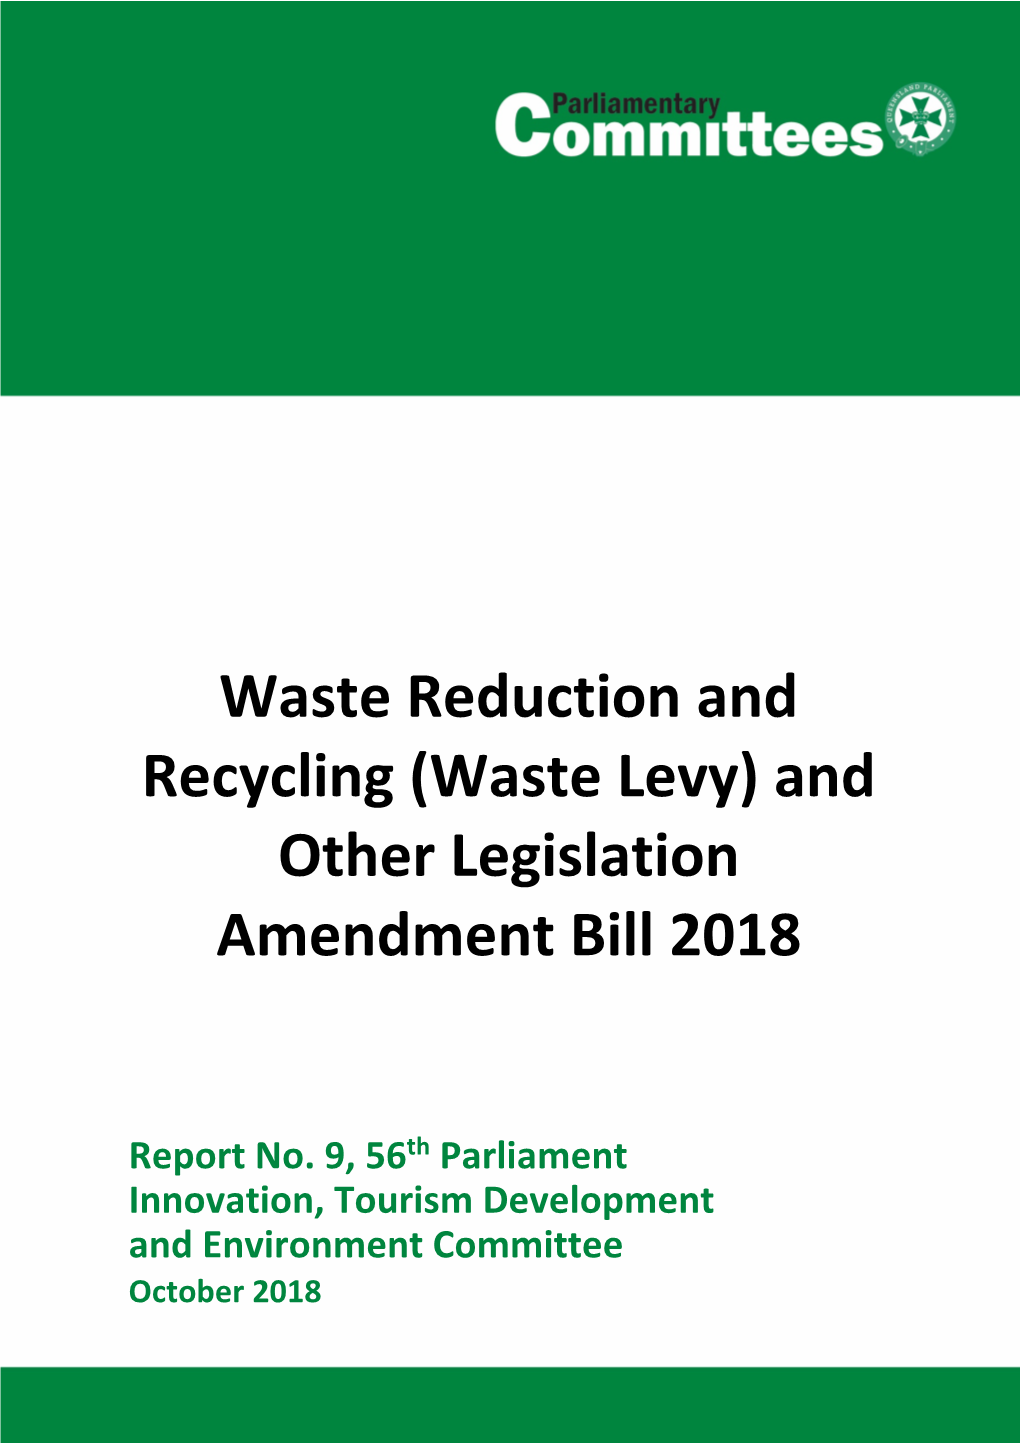 Waste Reduction and Recycling (Waste Levy) and Other Legislation Amendment Bill 2018